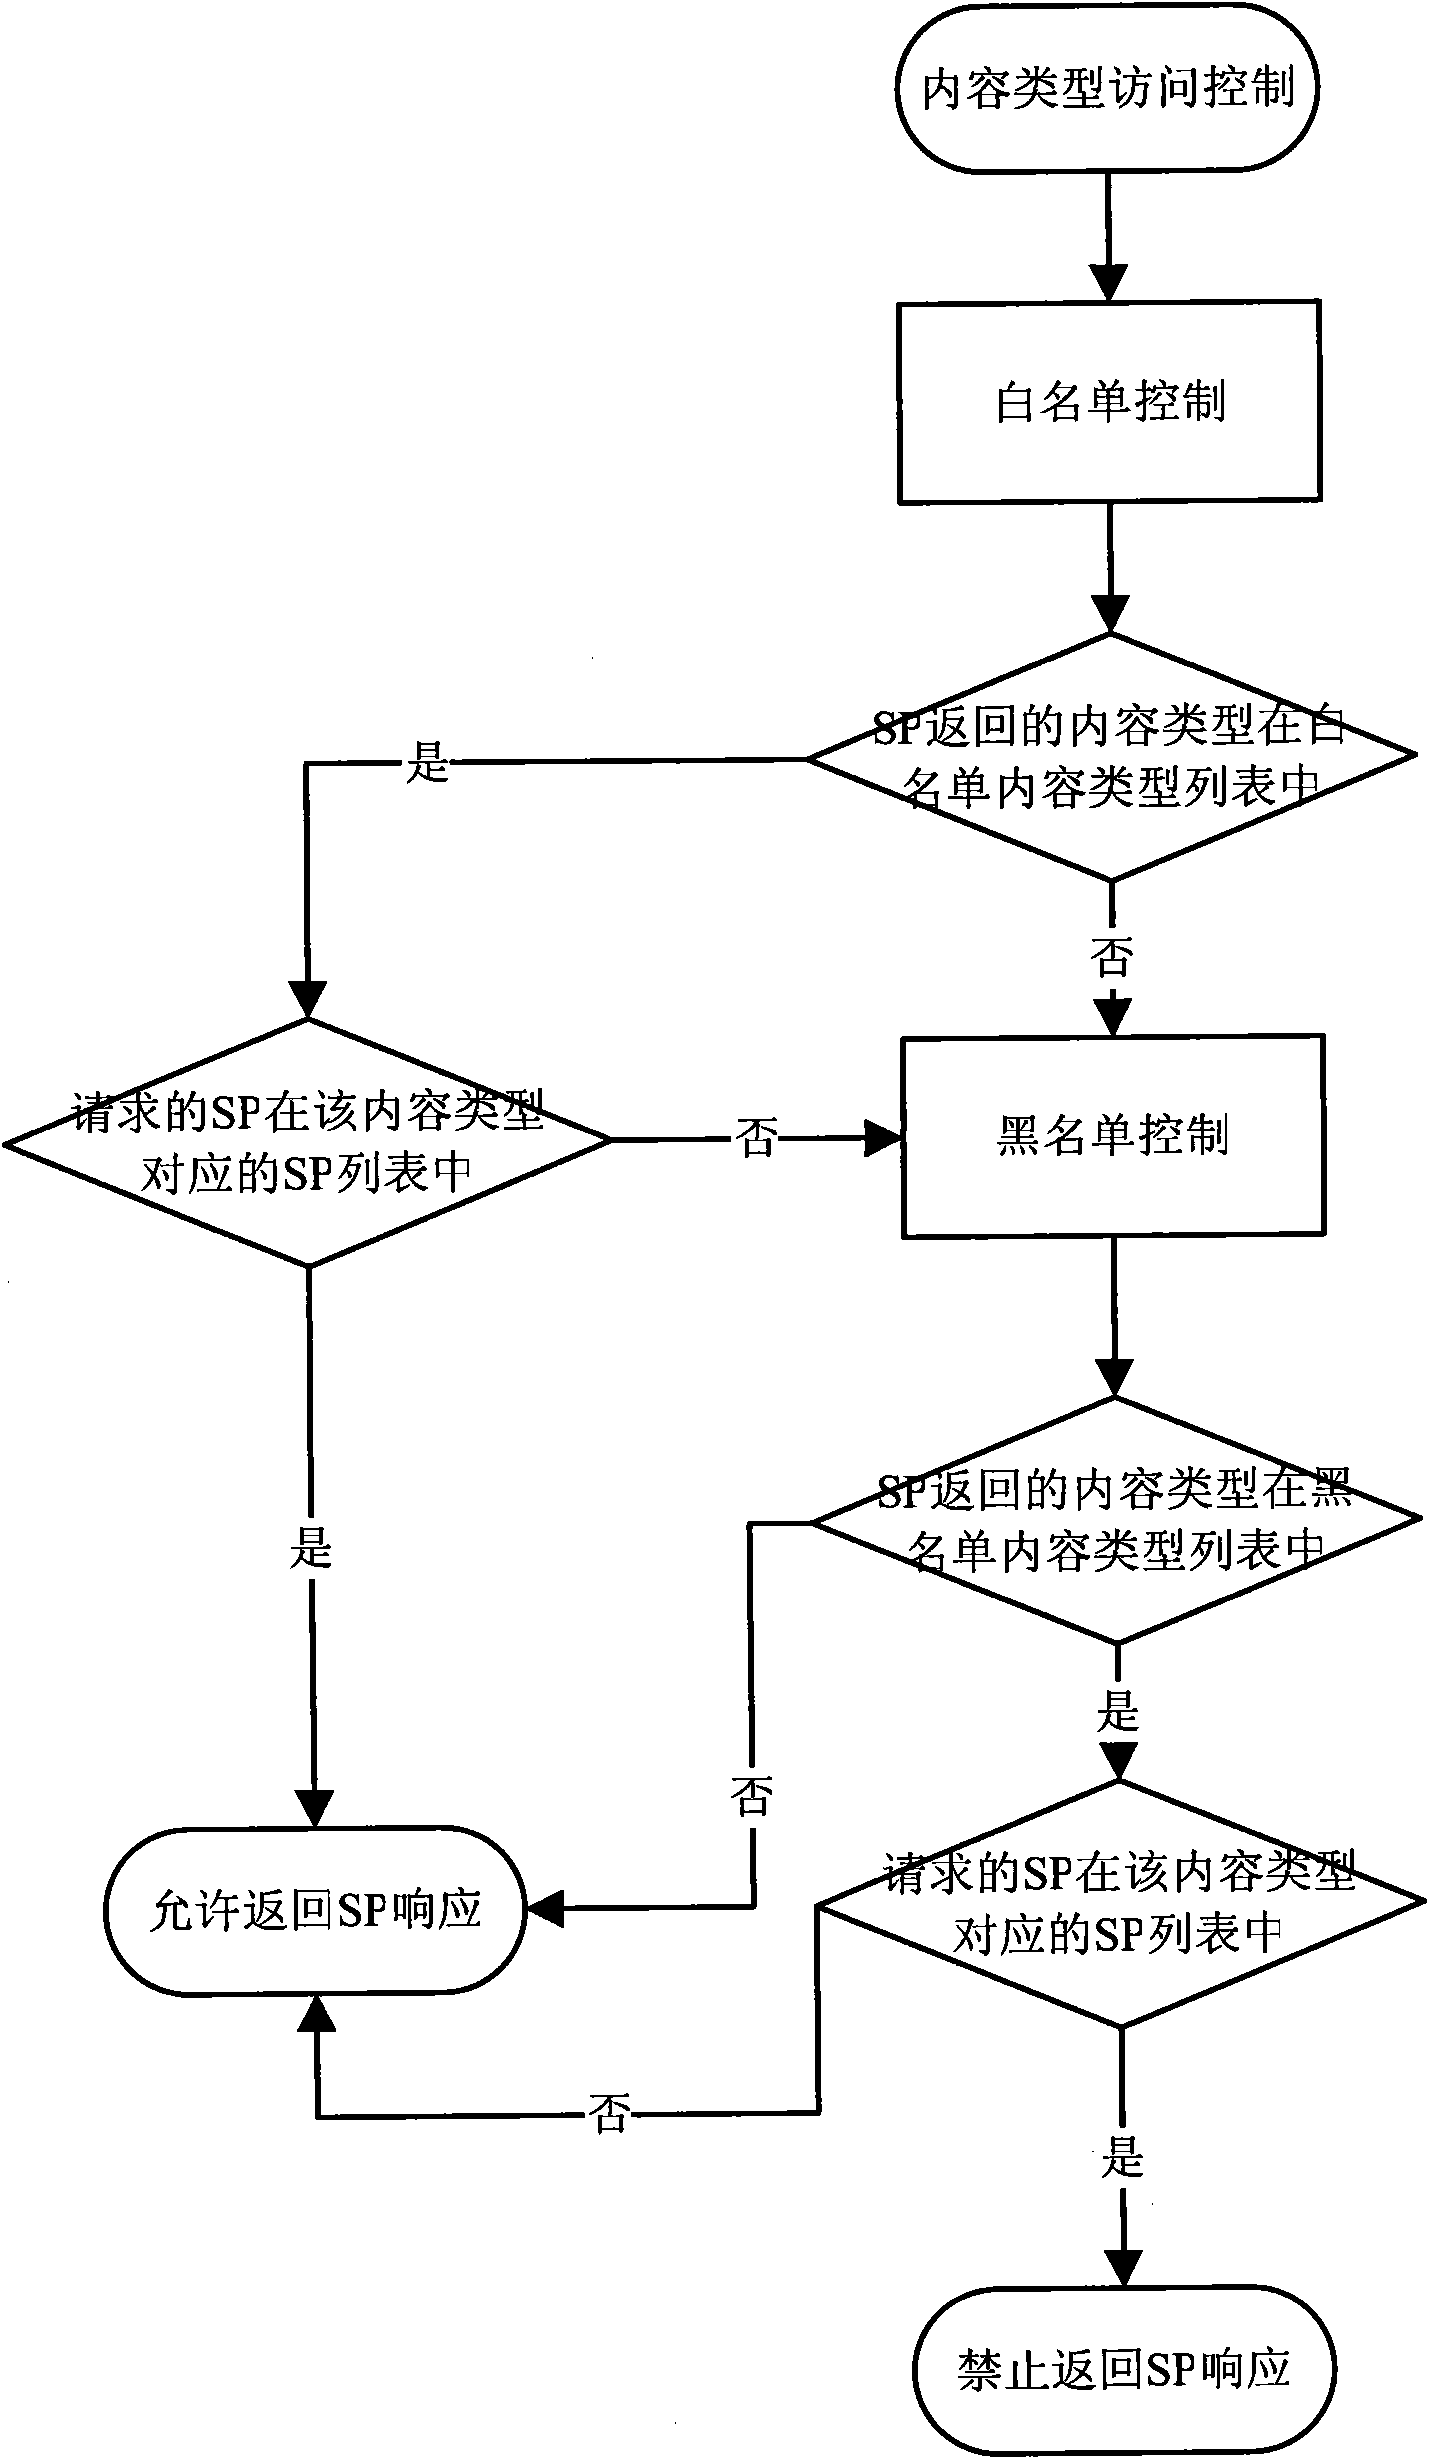 WAP-based method and WAP-based system for controlling accesses to SP